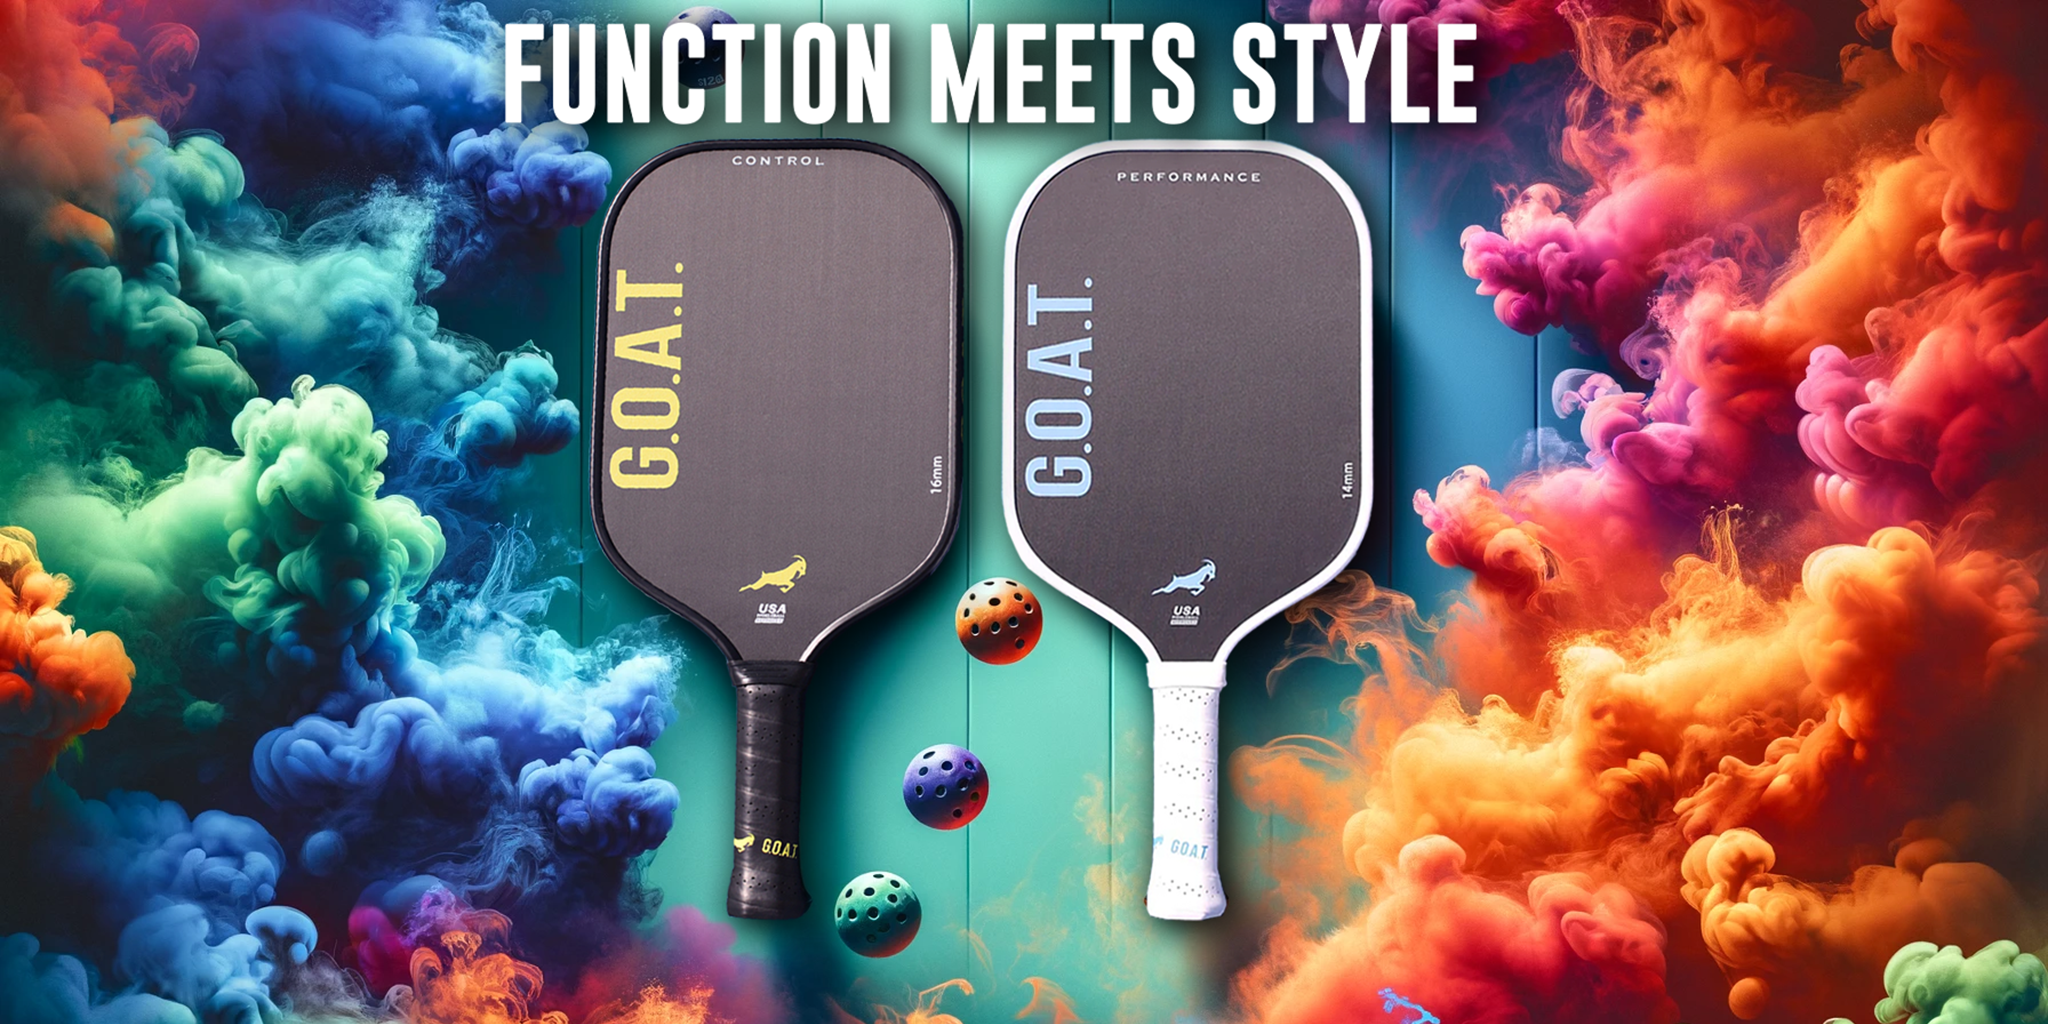 Black and Yellow GOAT Control Paddle and BLUE and white GOAT Performance Paddle with GOAT logo and name along with a few pickleballs with text function meets style